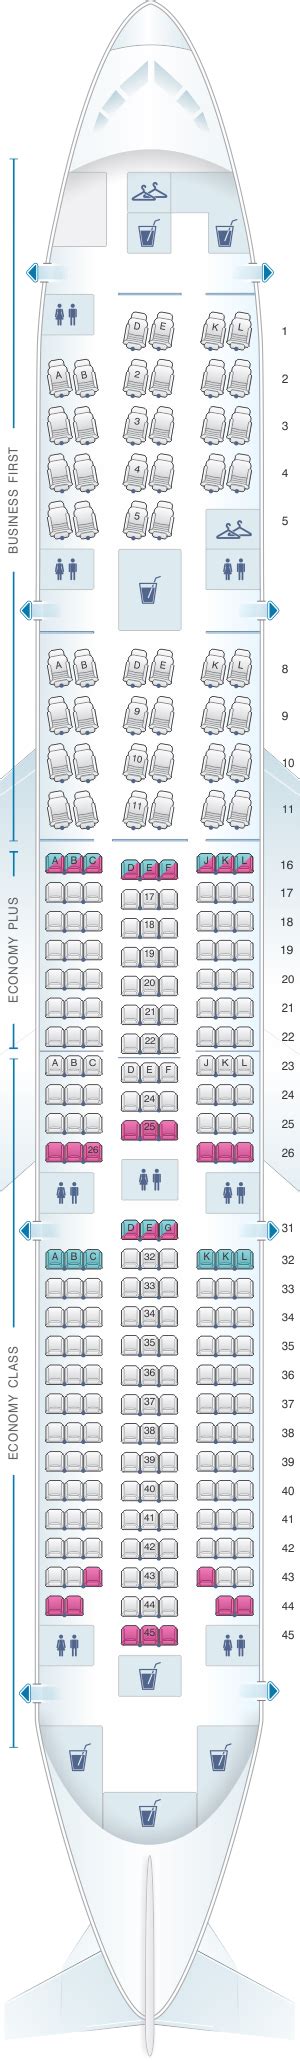 See seat maps for all our different aircraft. Skip to main content. By using ba.com you agree to ... Boeing 777-200 with first class. Boeing 777-200 LGW. Boeing 777 .... 